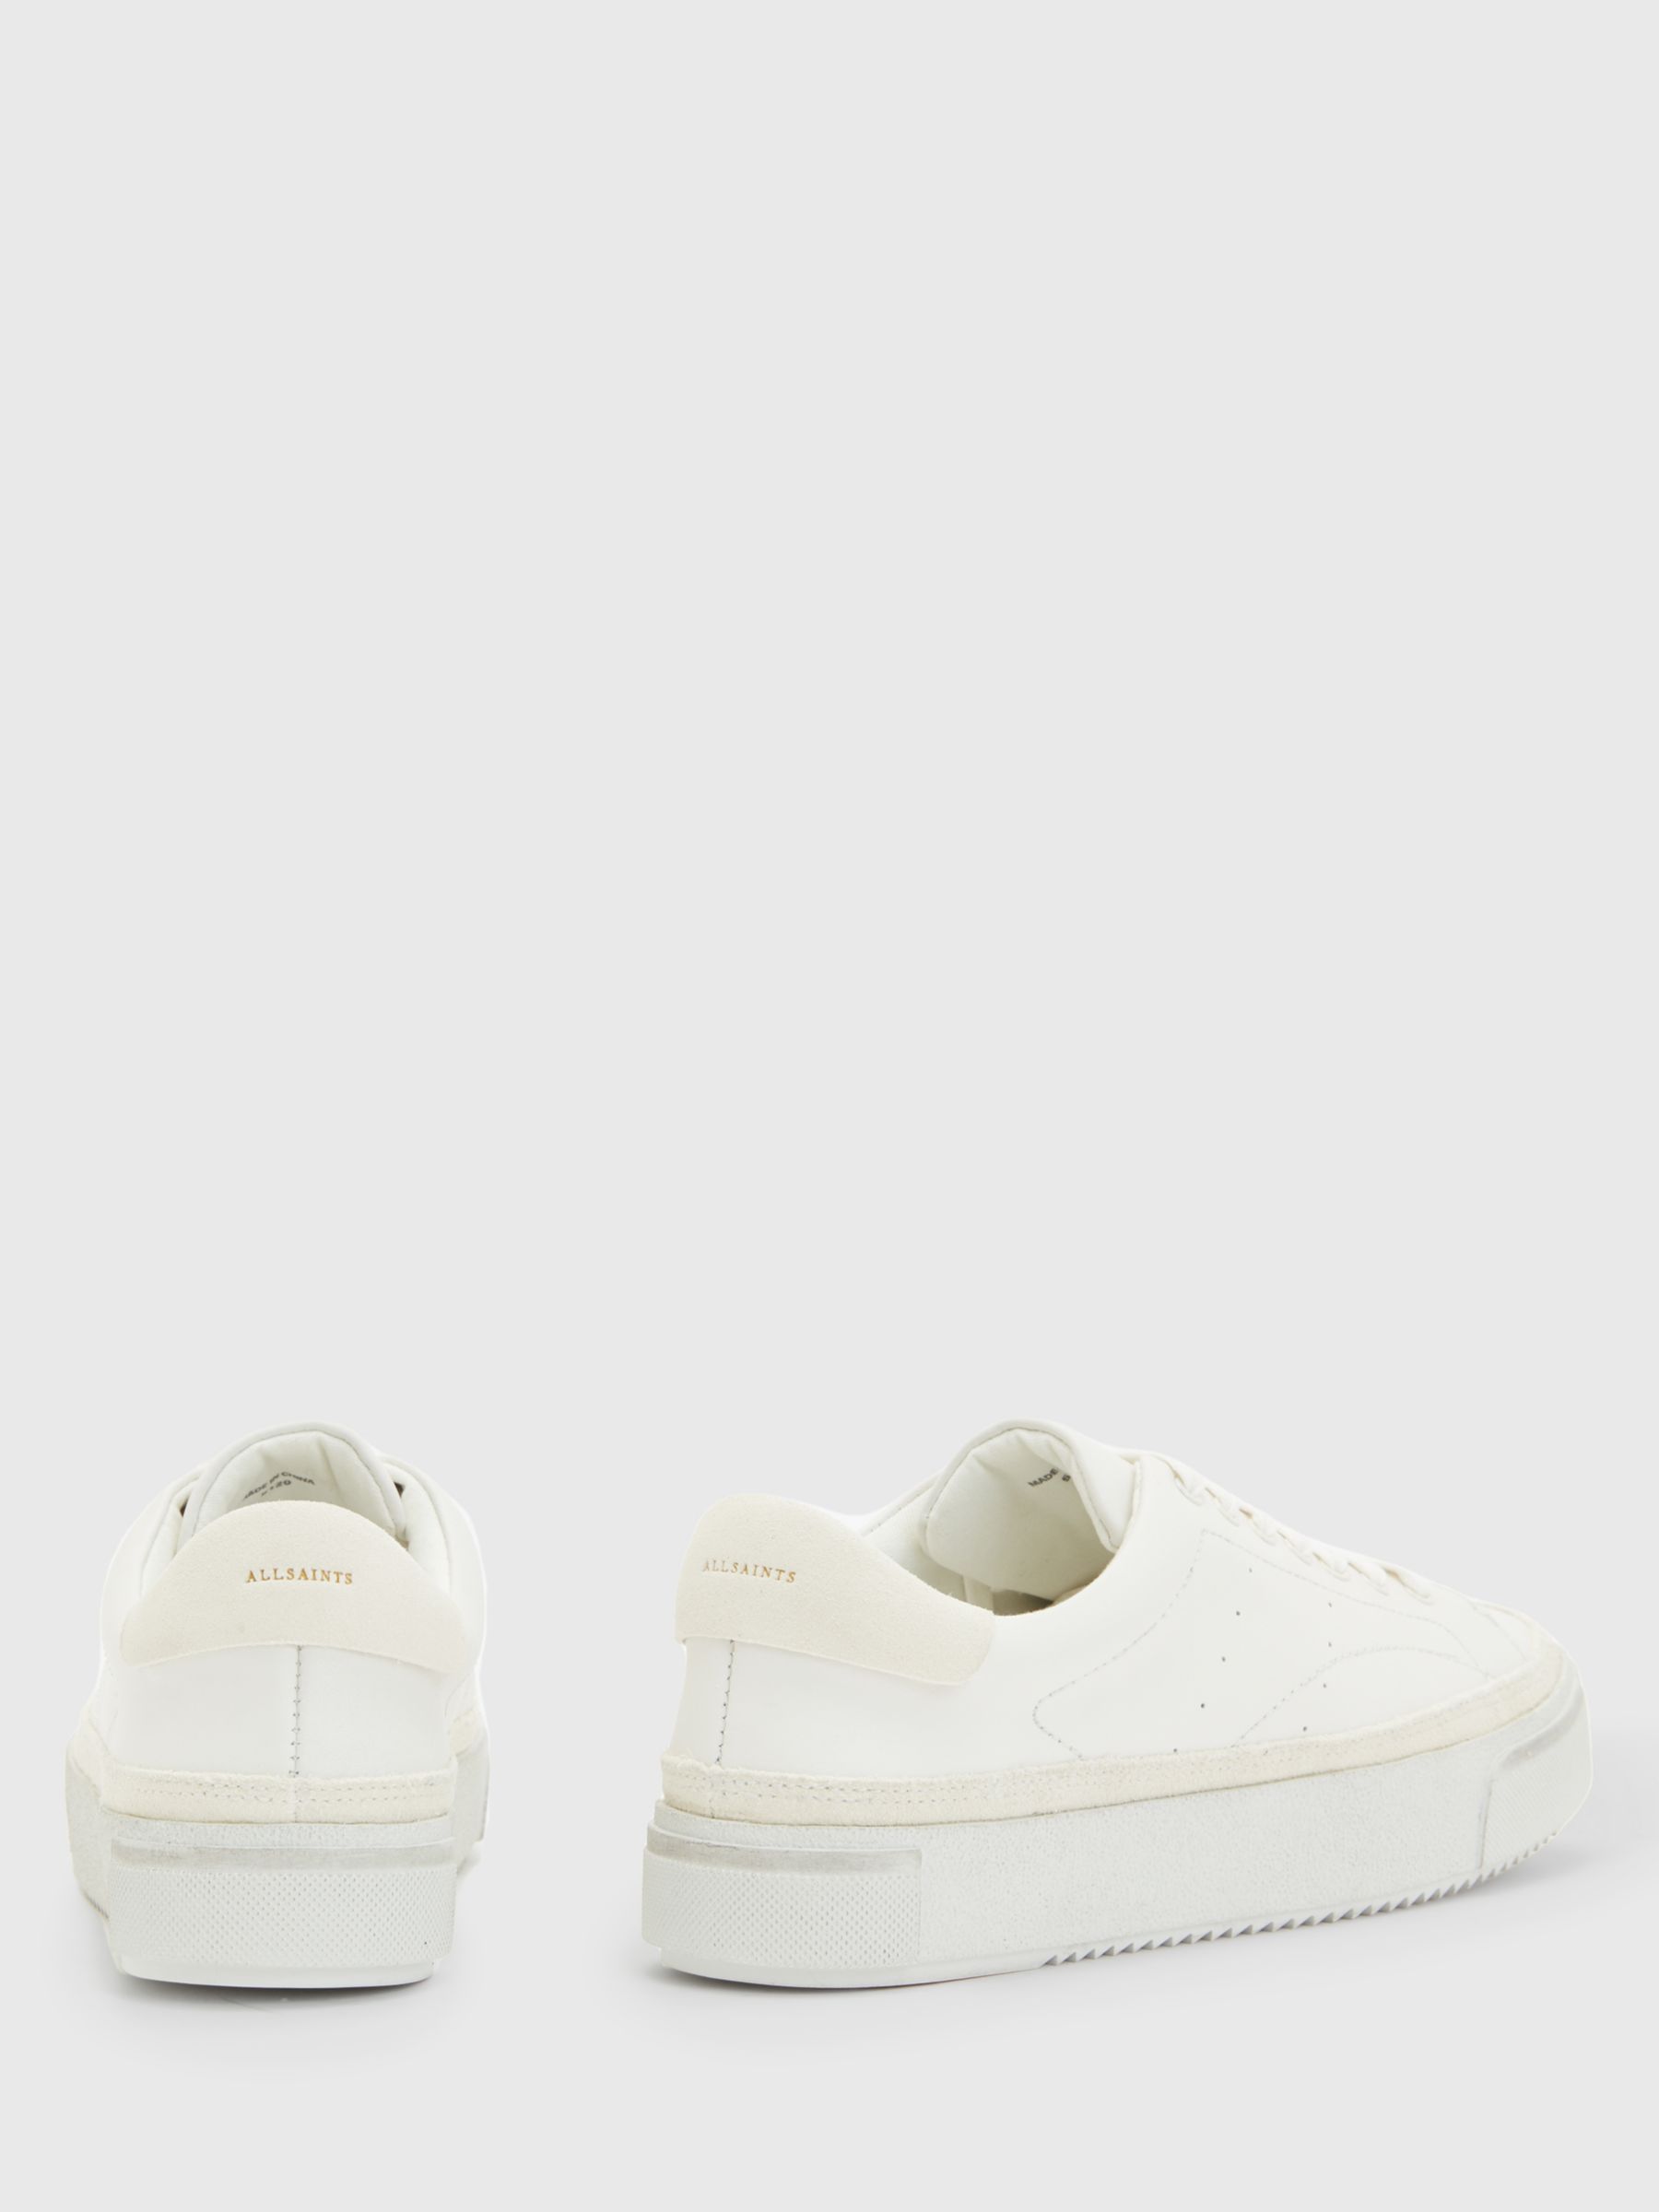 Buy AllSaints Trish Leather Lace Up Trainers, Chalk White Online at johnlewis.com